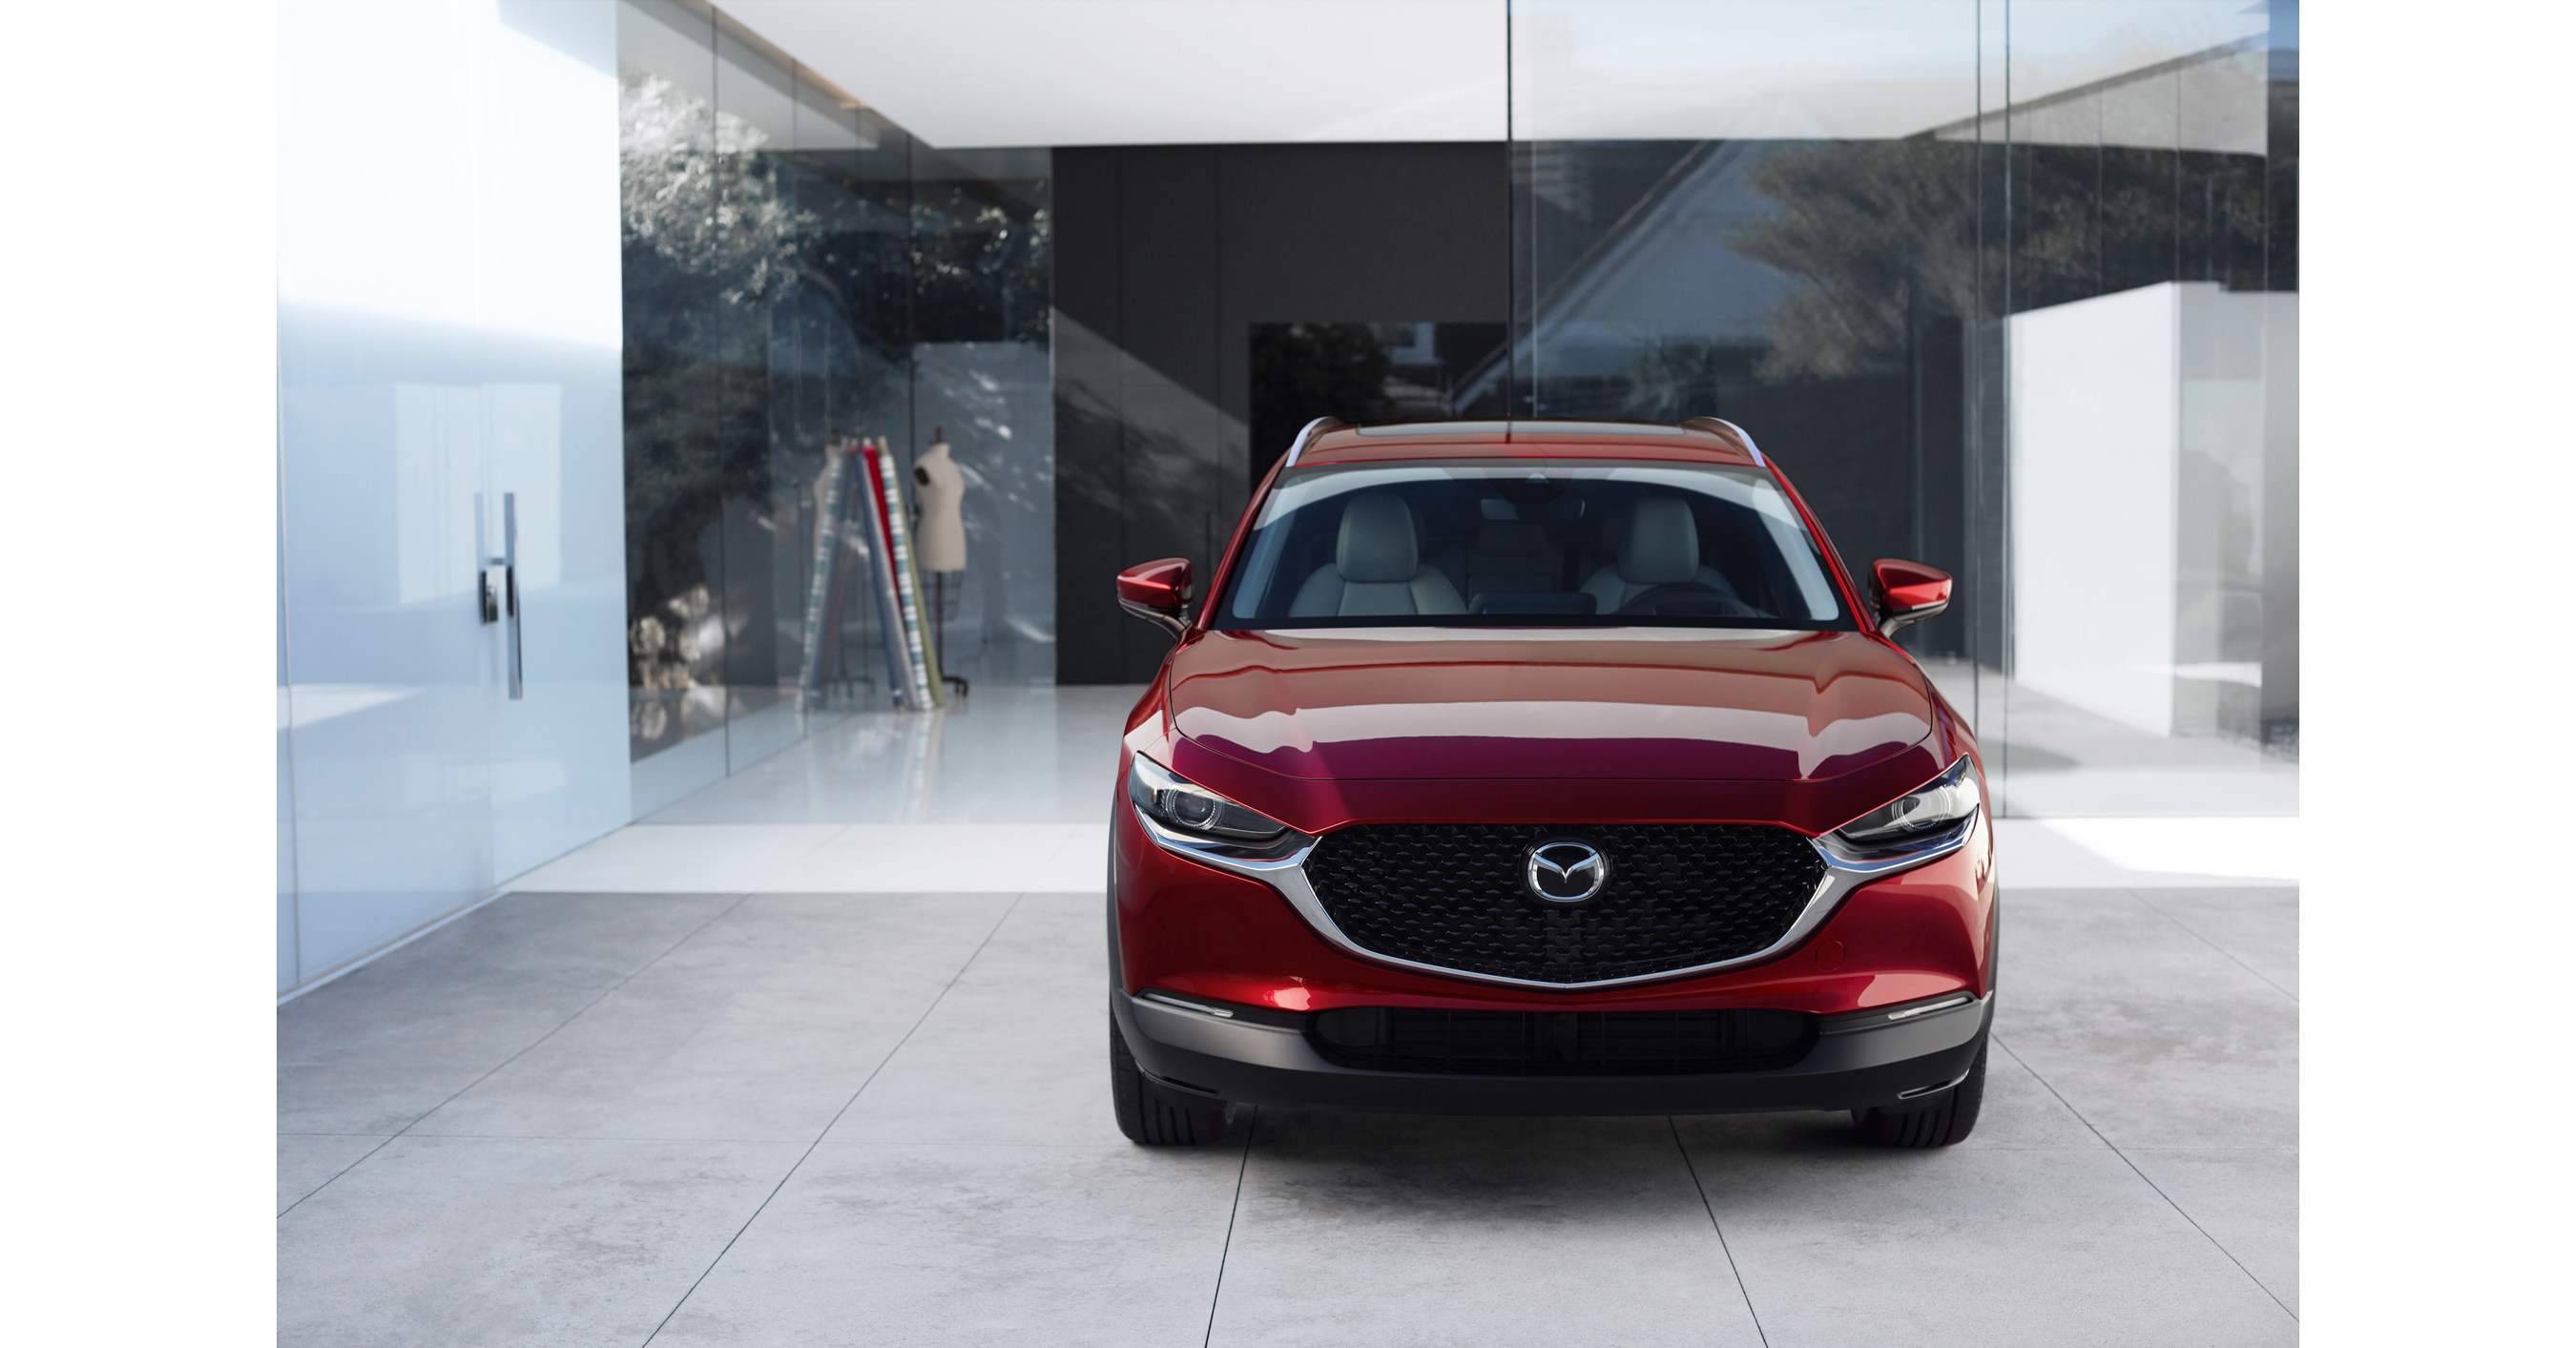 2023 Mazda CX-30: Pricing and Packaging - Oct 18, 2022